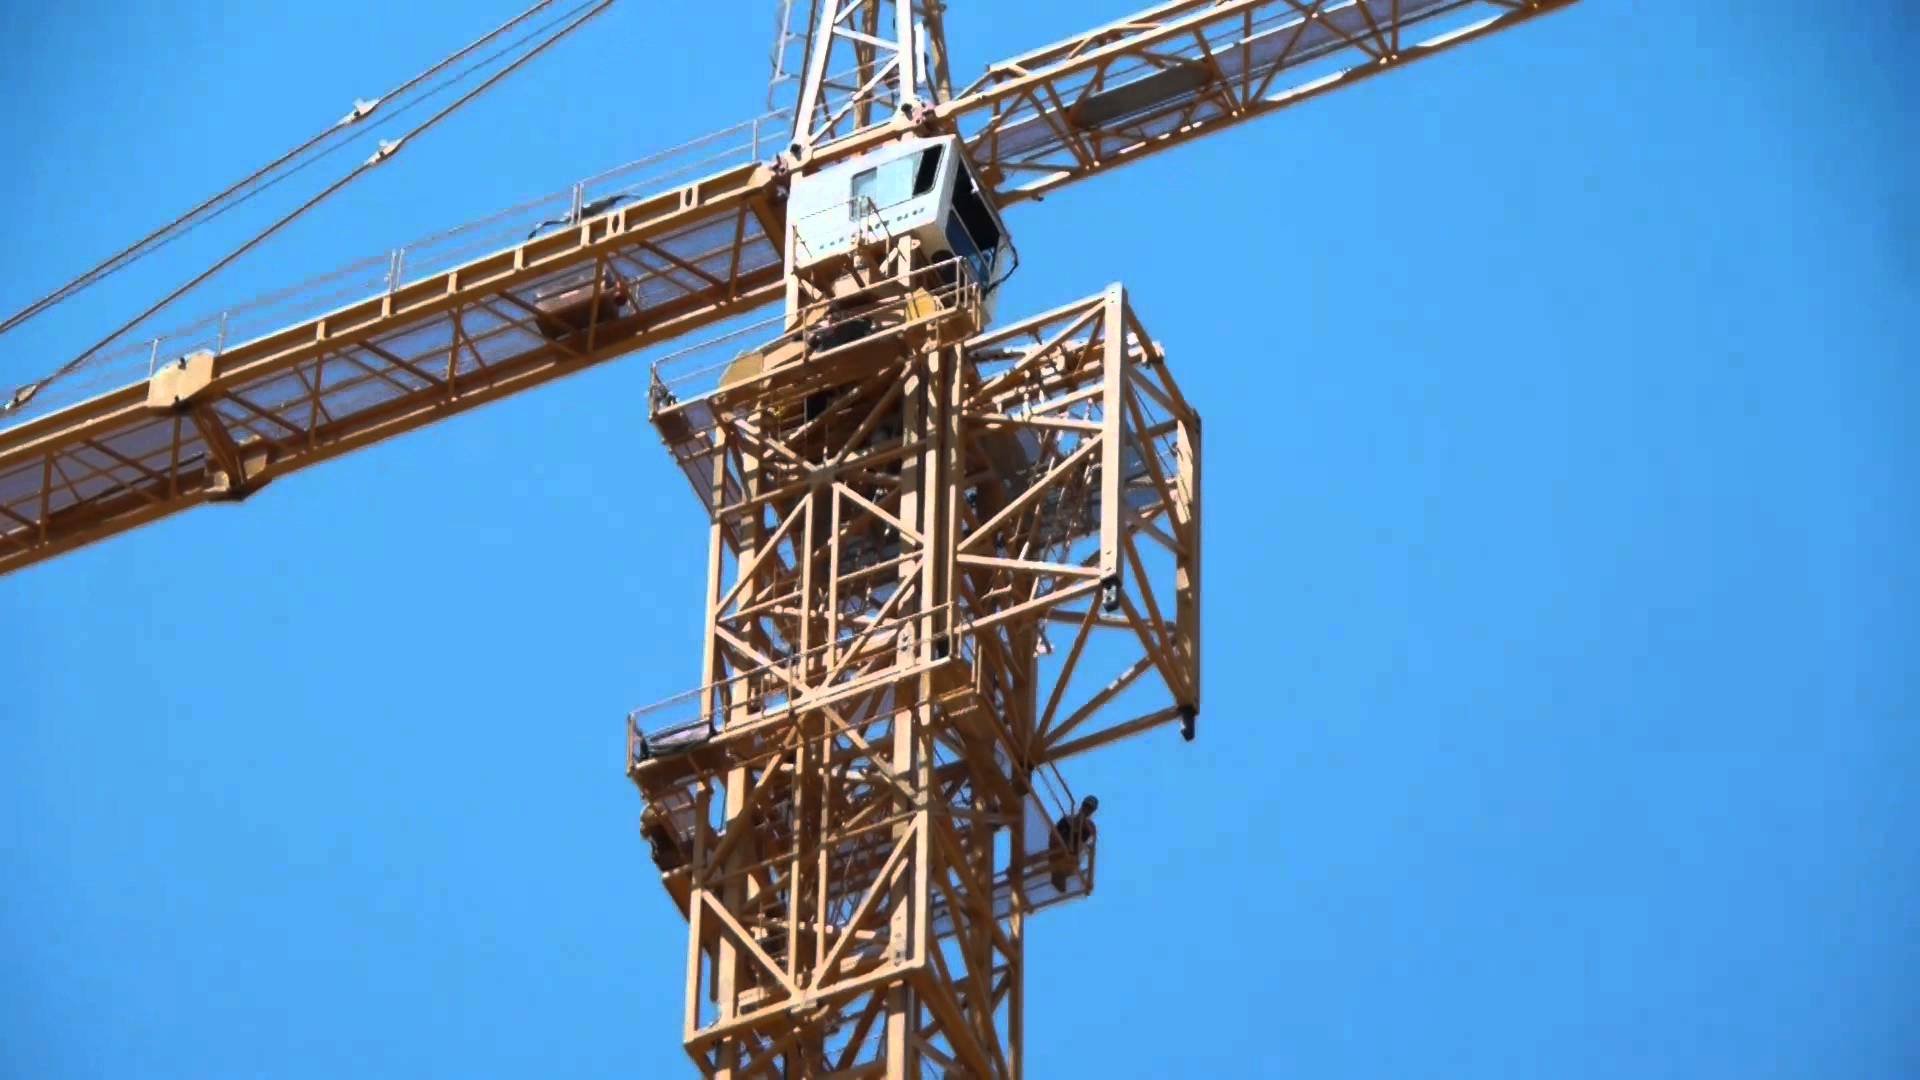 The tower crane at K2 jumps 100 feet - YouTube